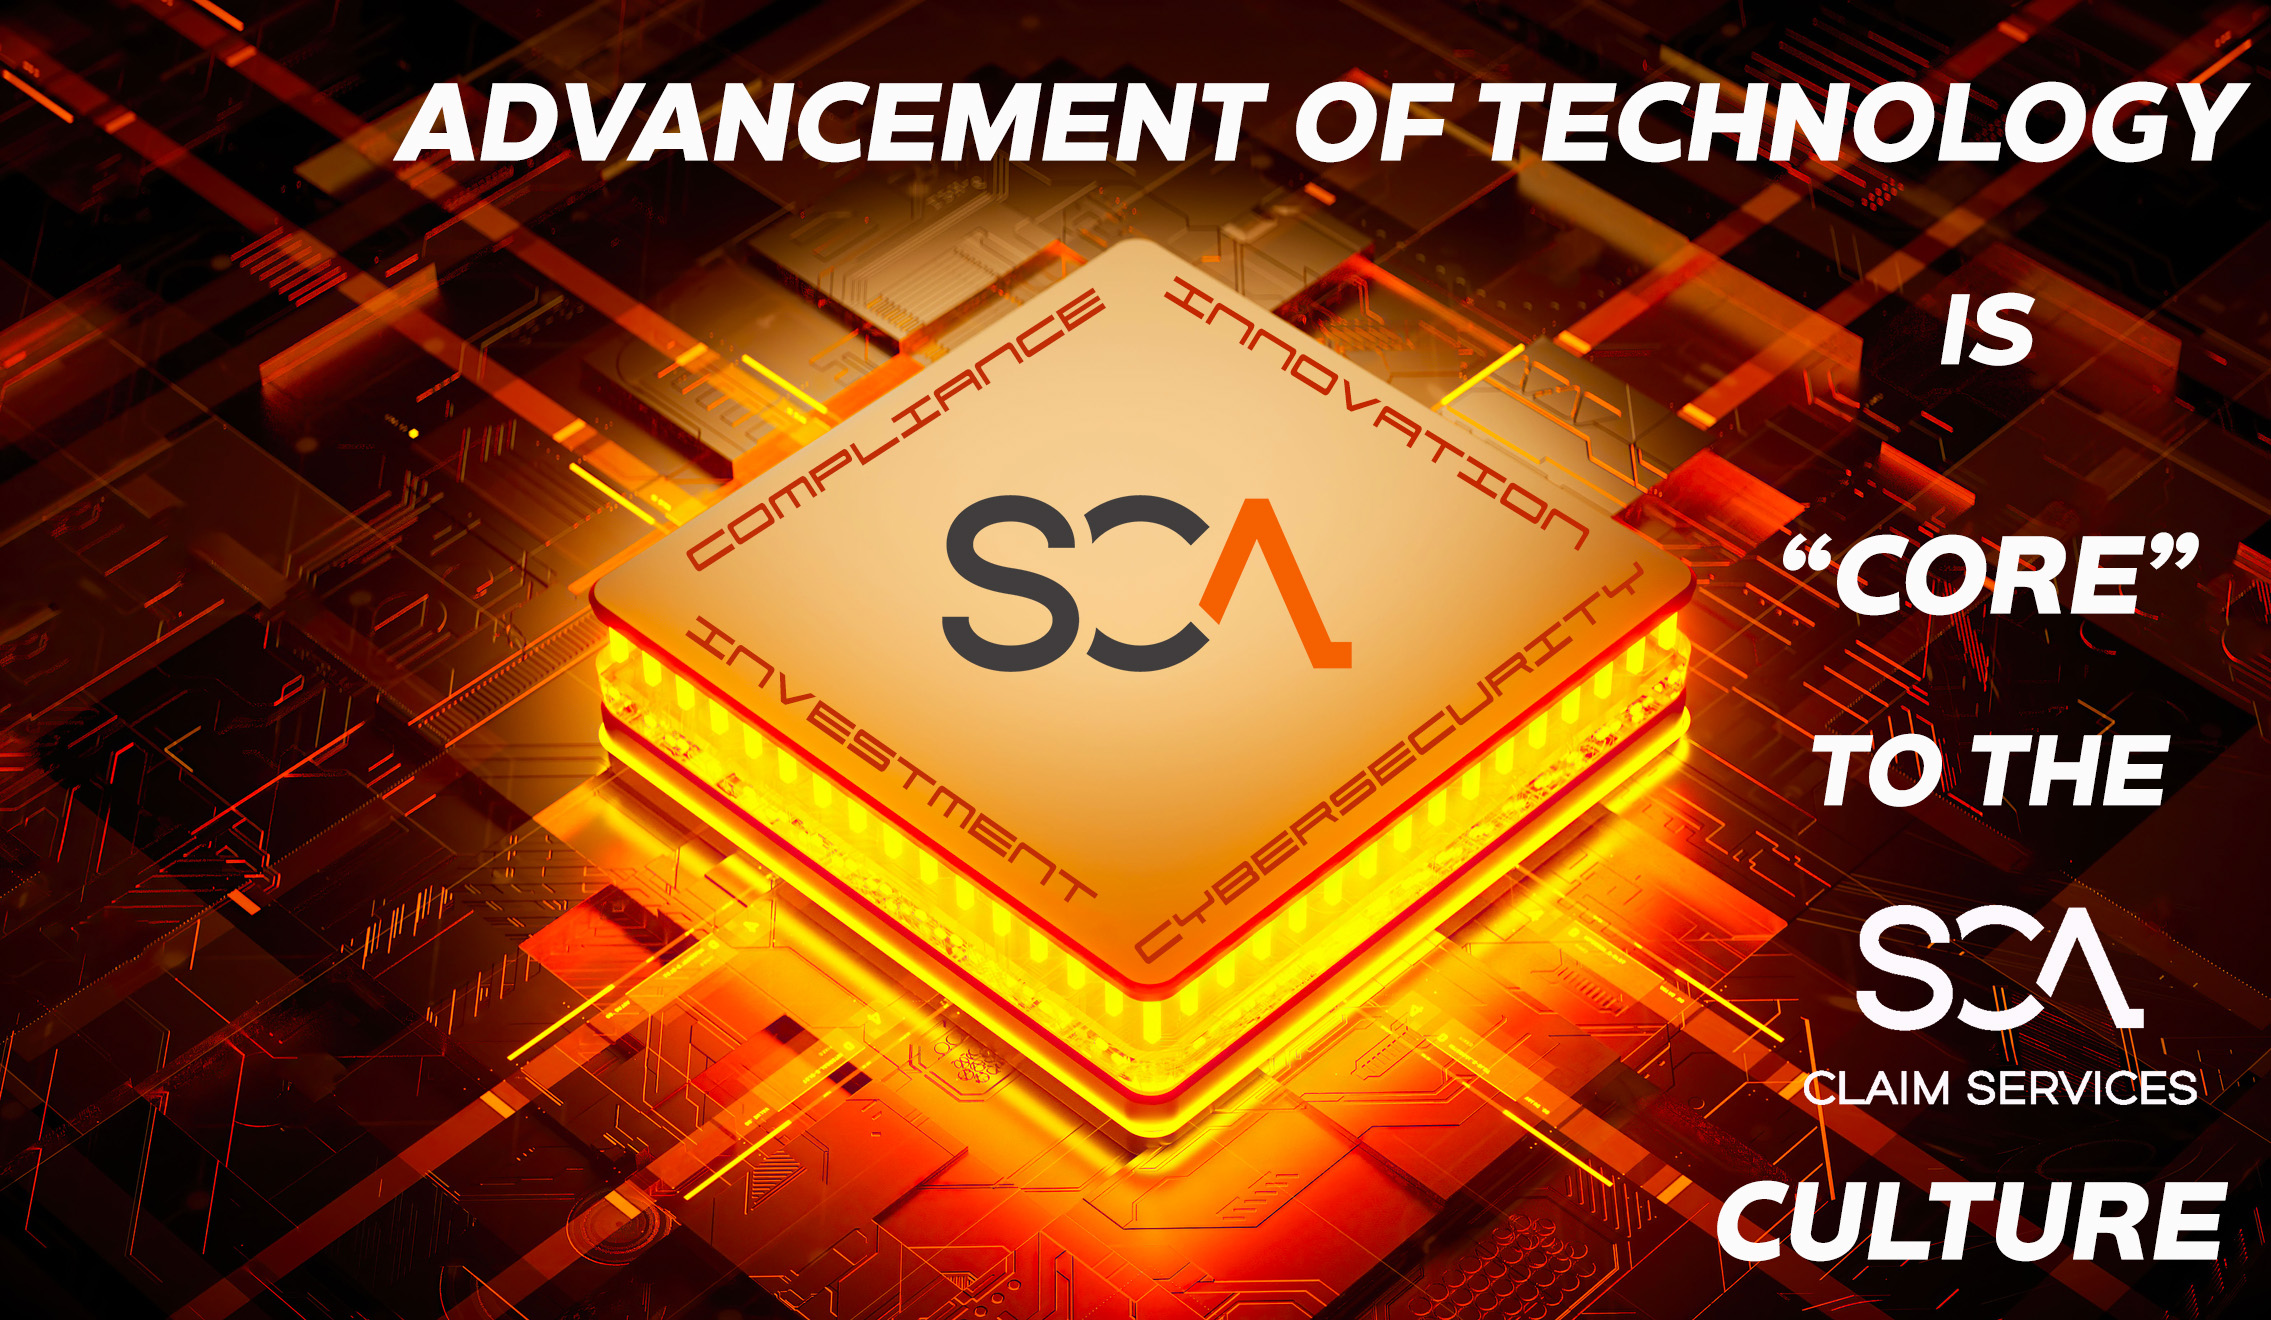 SCA's CORE Technology